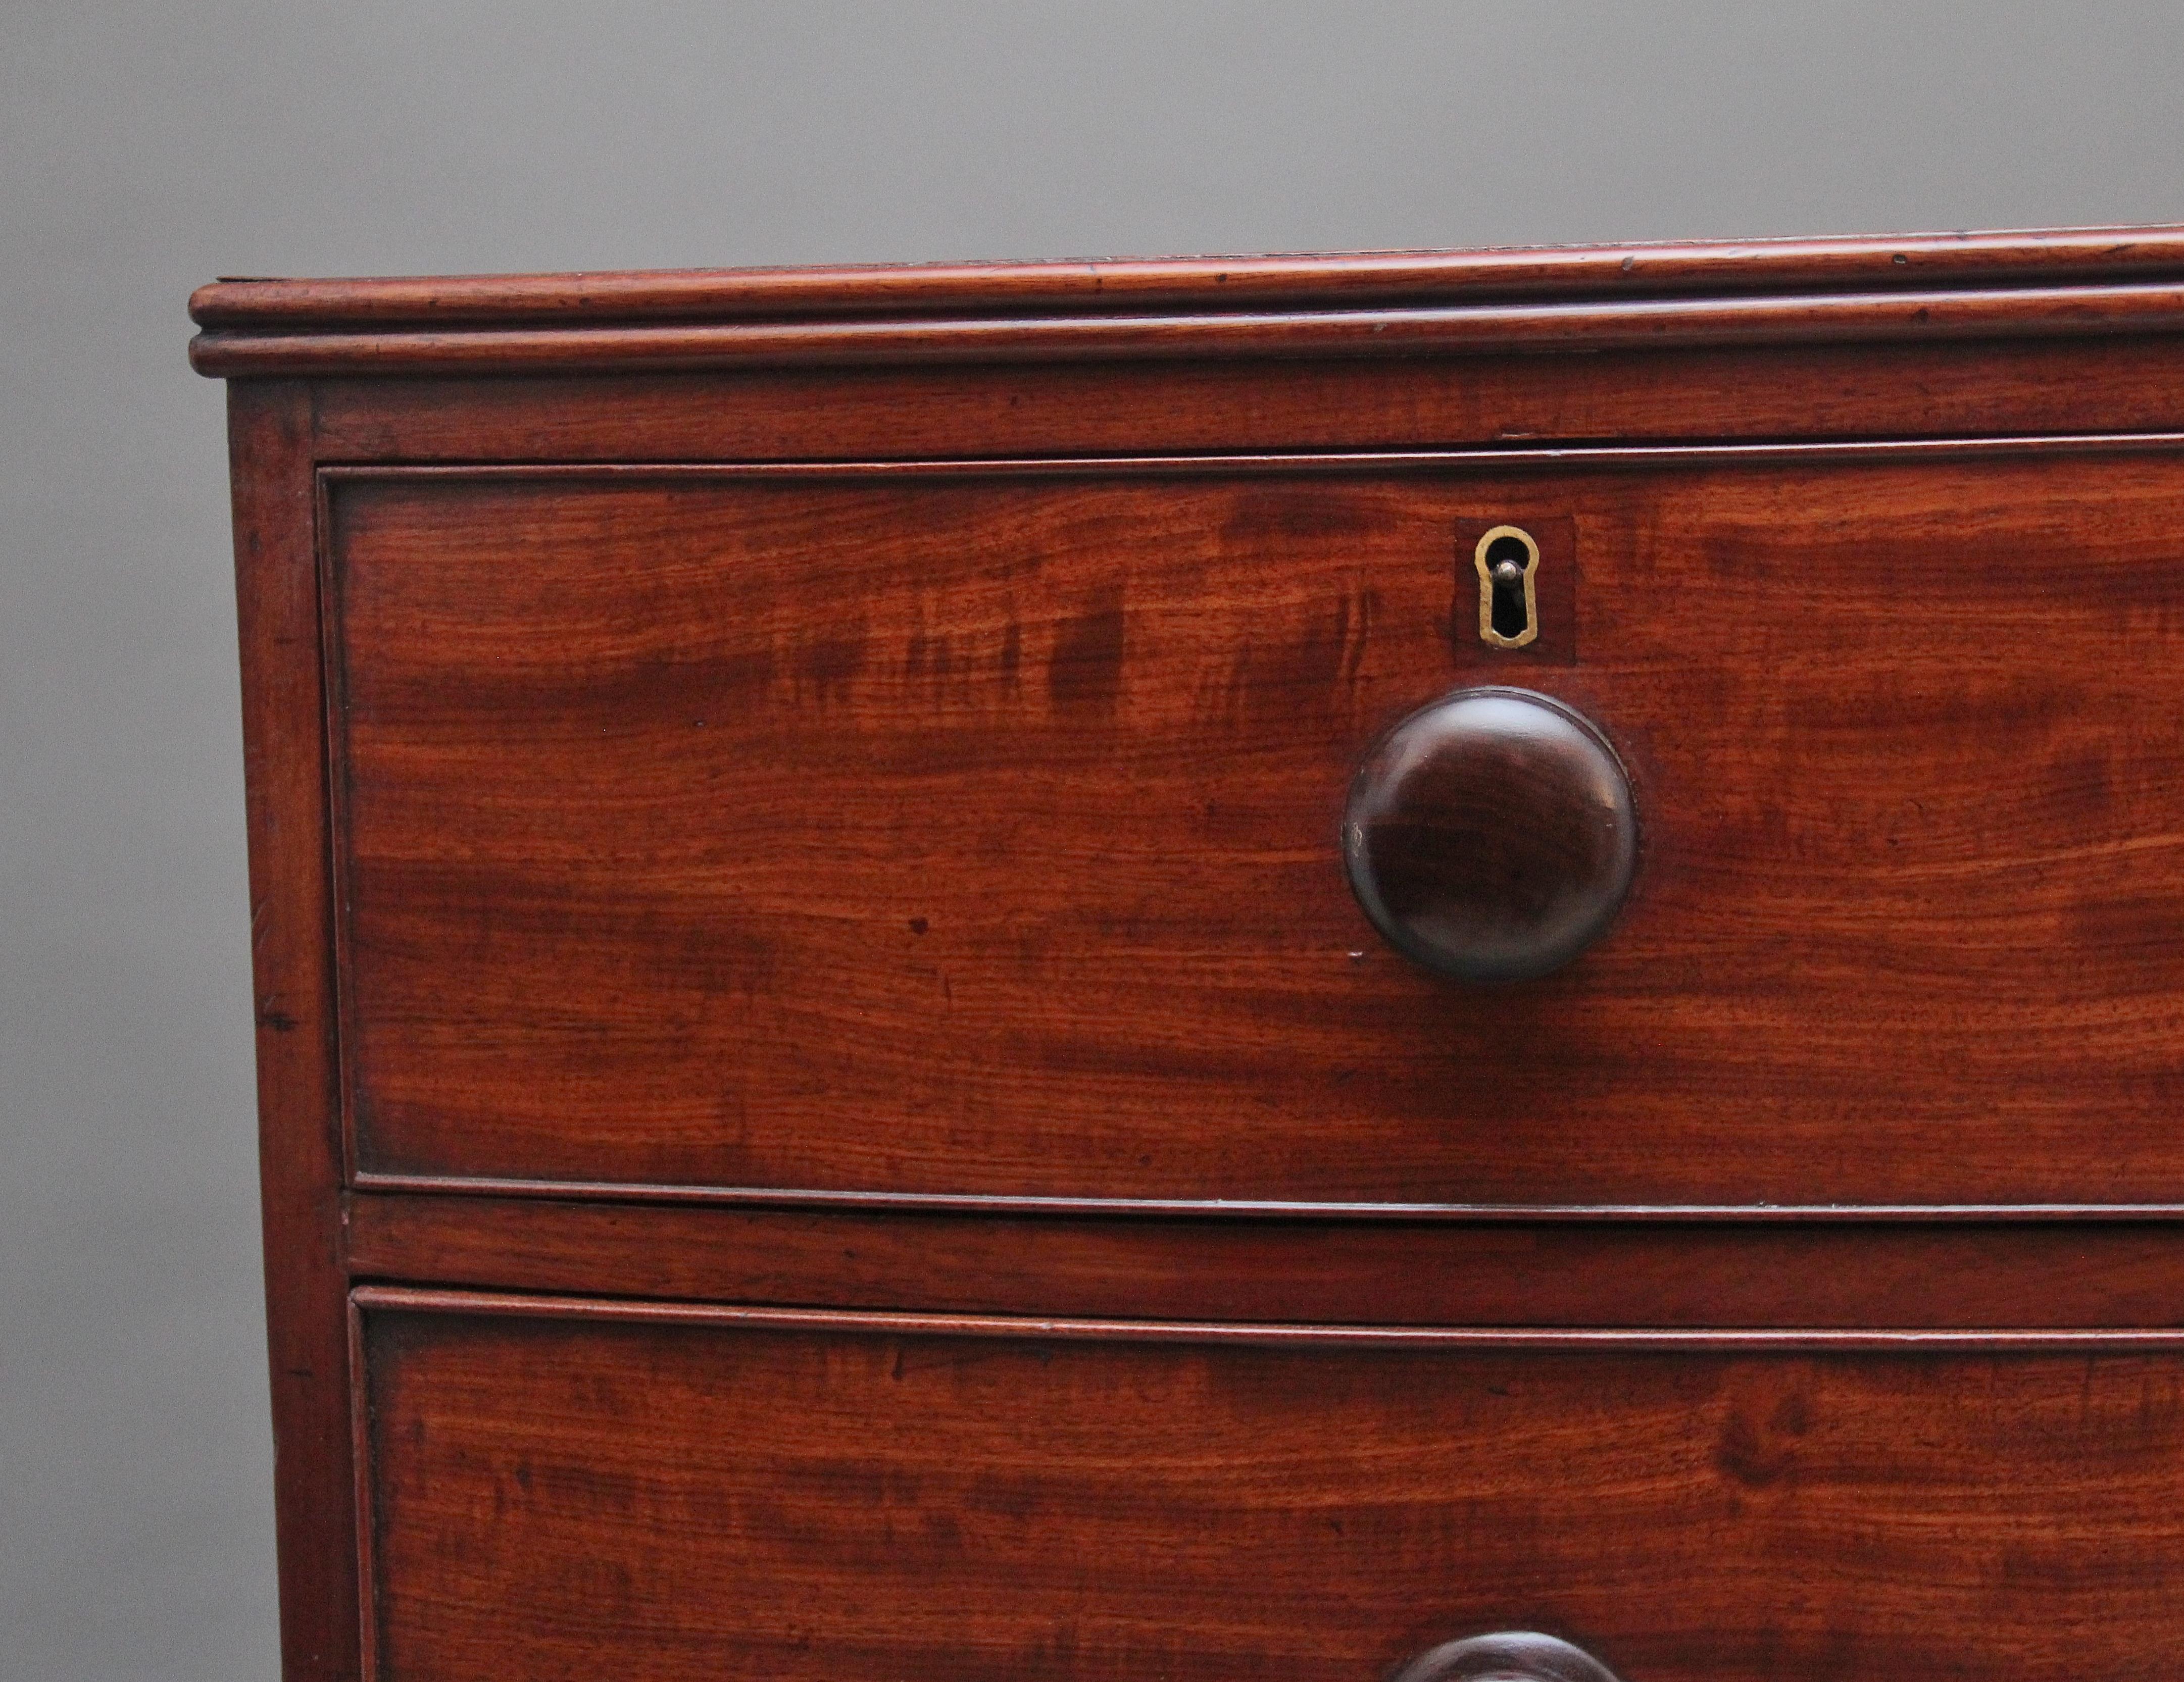 Early 19th Century mahogany bowfront chest of drawers of nice proportions, having a nice figured top with a moulded edge above a selection of two short over three long oak lined drawers with the original turned wooden knob handles, having a nice